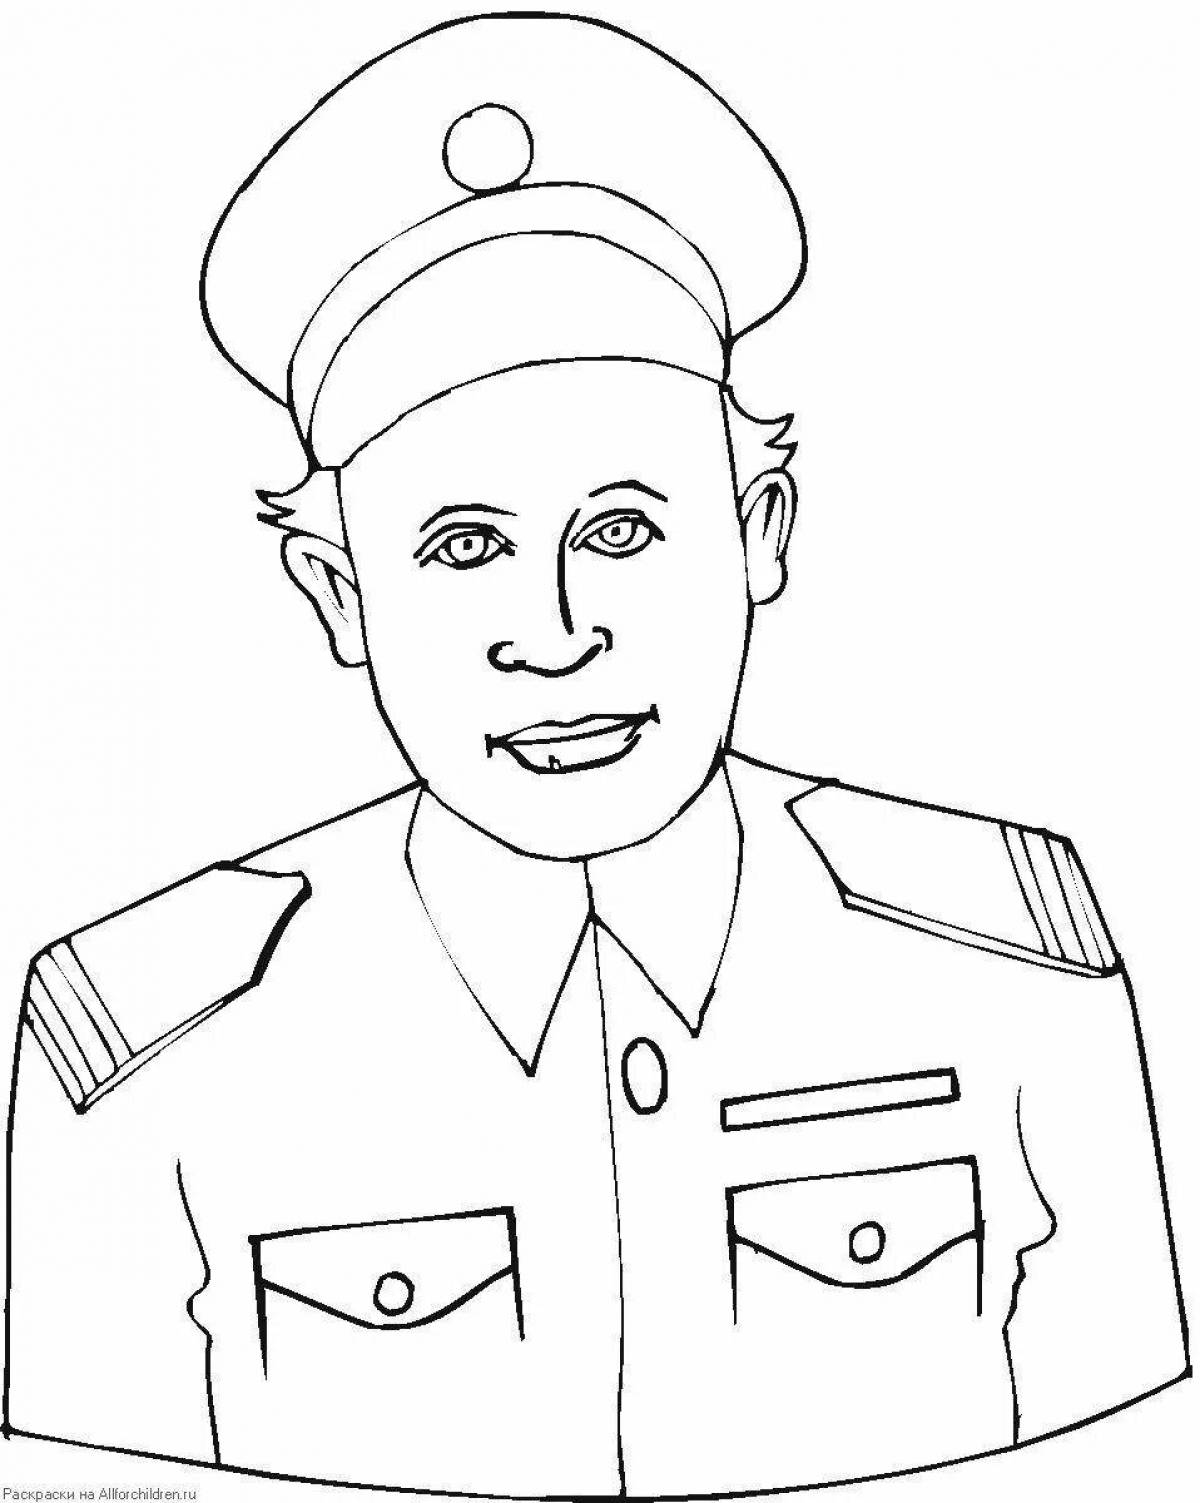 First Soldier face coloring page